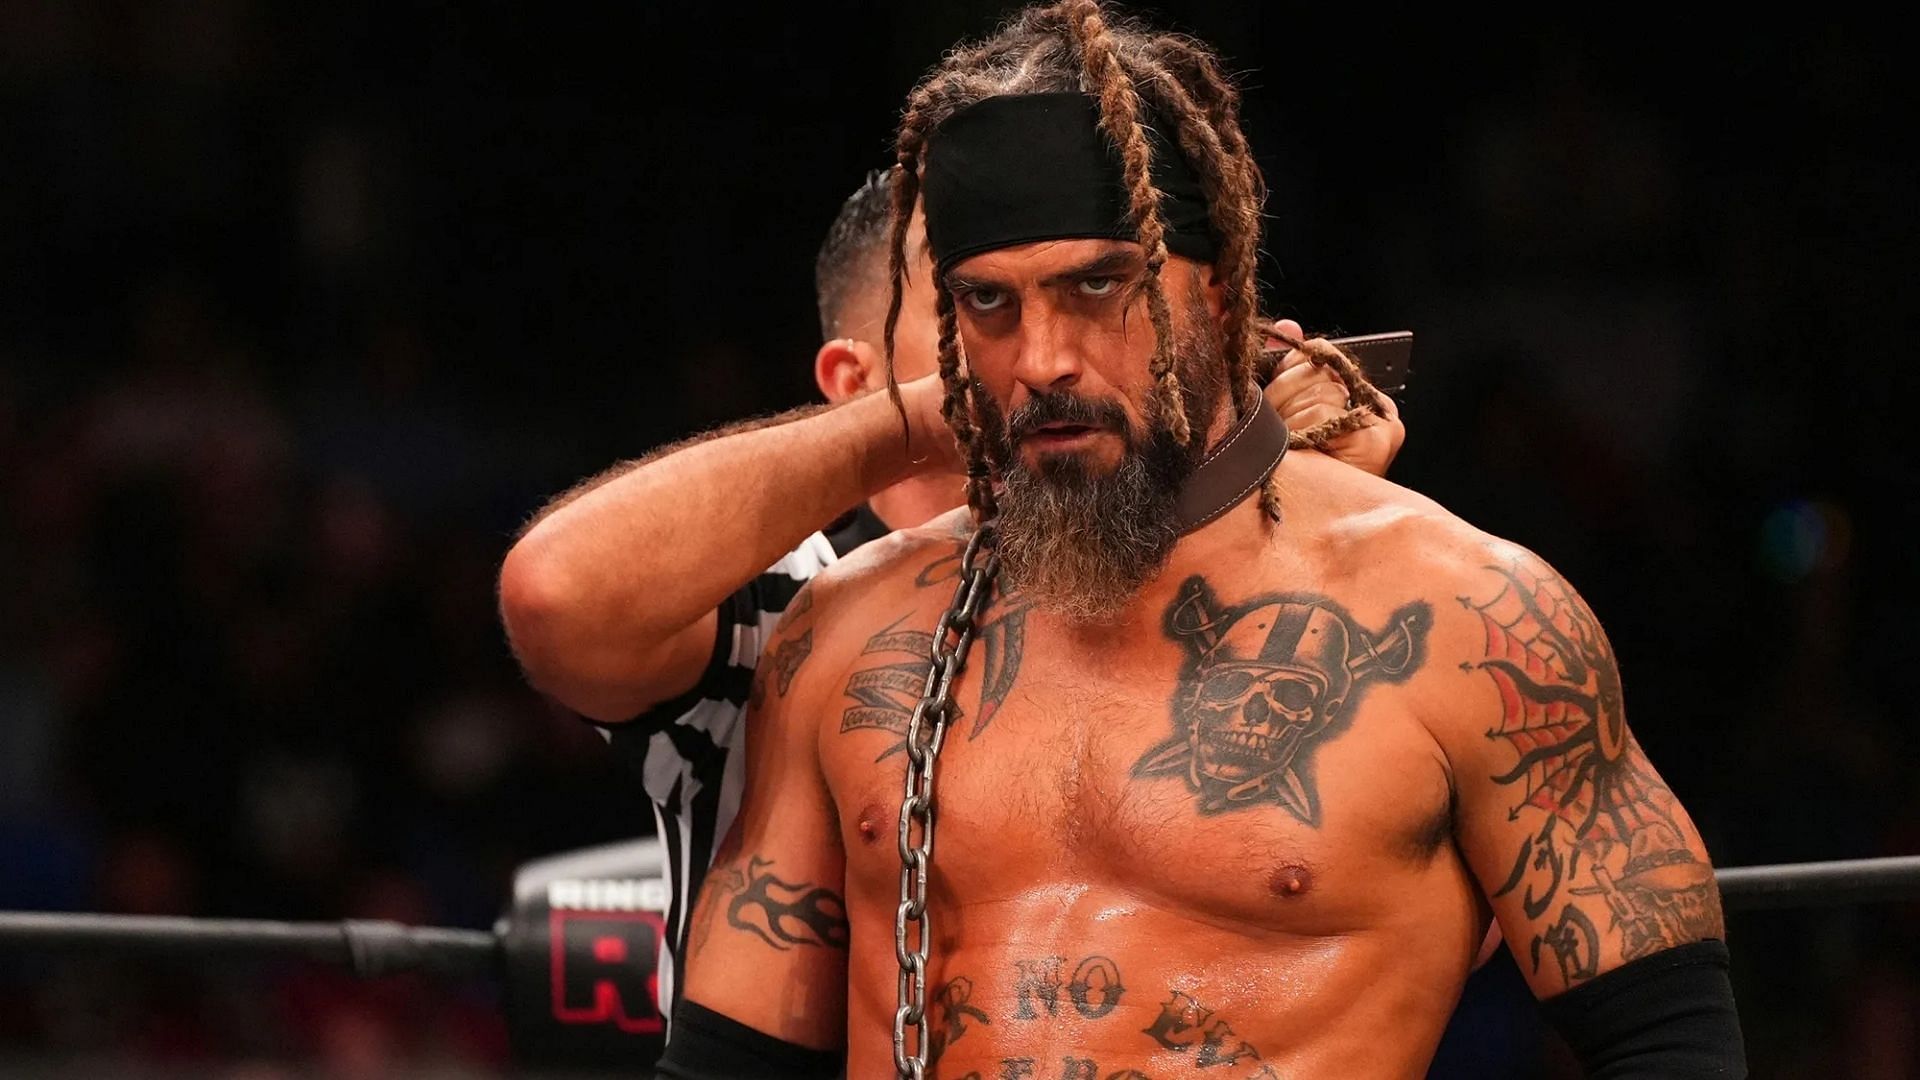 Jay Briscoe passed away in January of this year.